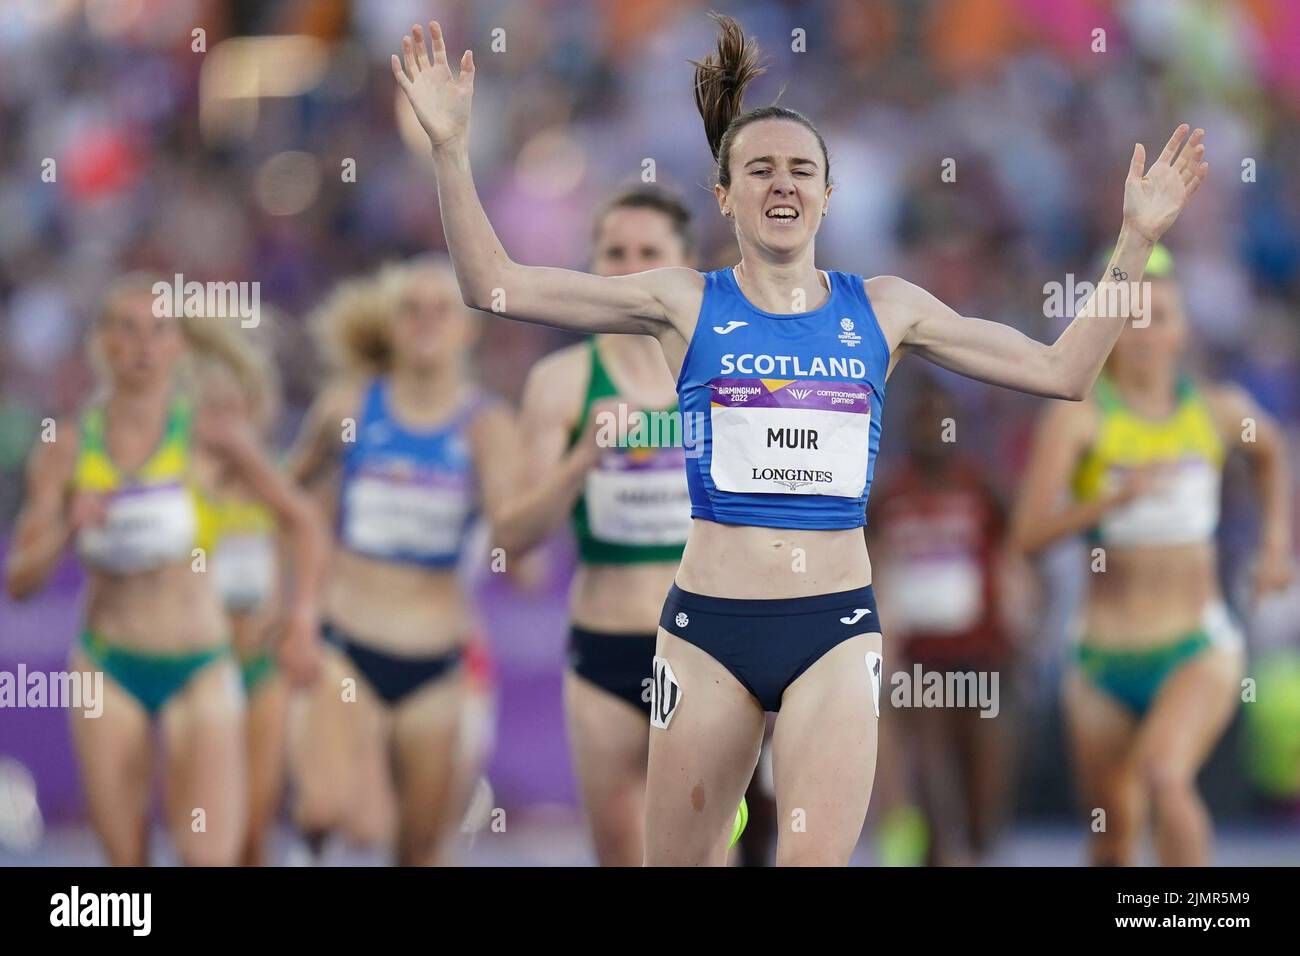 Scotland’s Laura Muir celebrates after winning the Women’s 1500m Final at Alexander Stadium on day ten of the 2022 Commonwealth Games in Birmingham. Picture date: Sunday August 7, 2022. Stock Photo